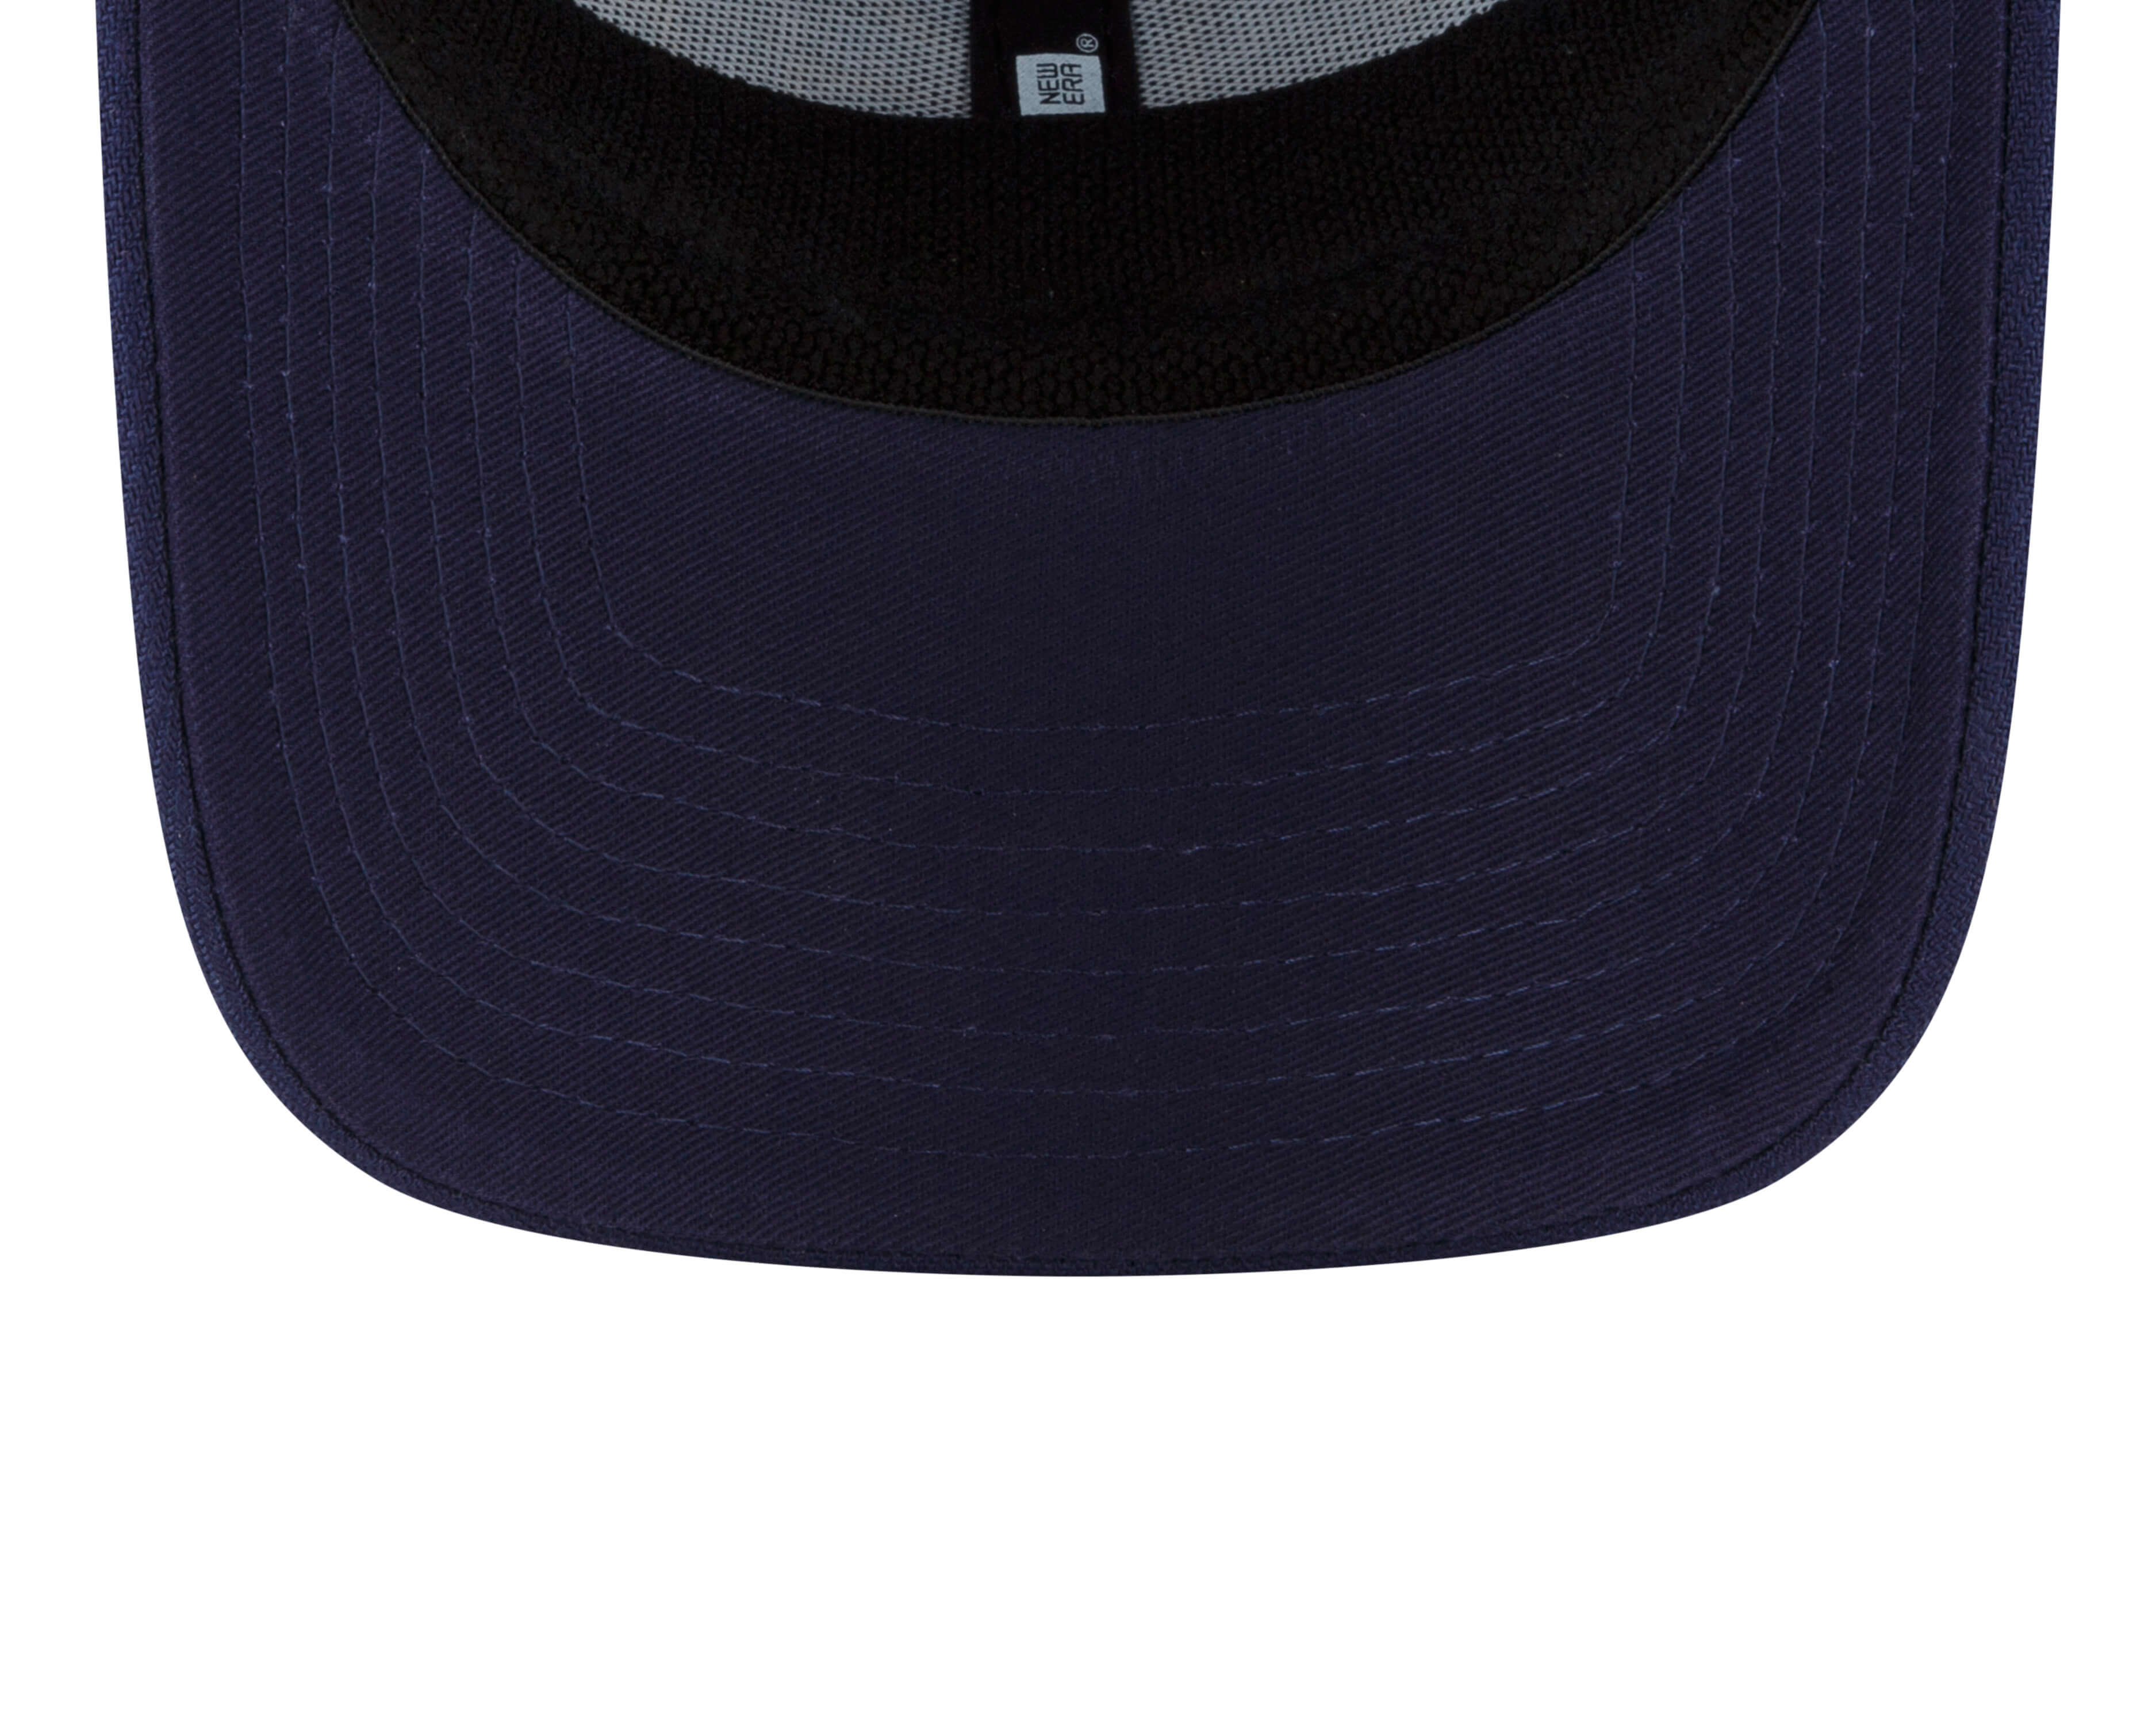 Milwaukee Brewers MLB City Connect Navy 39THIRTY Cap